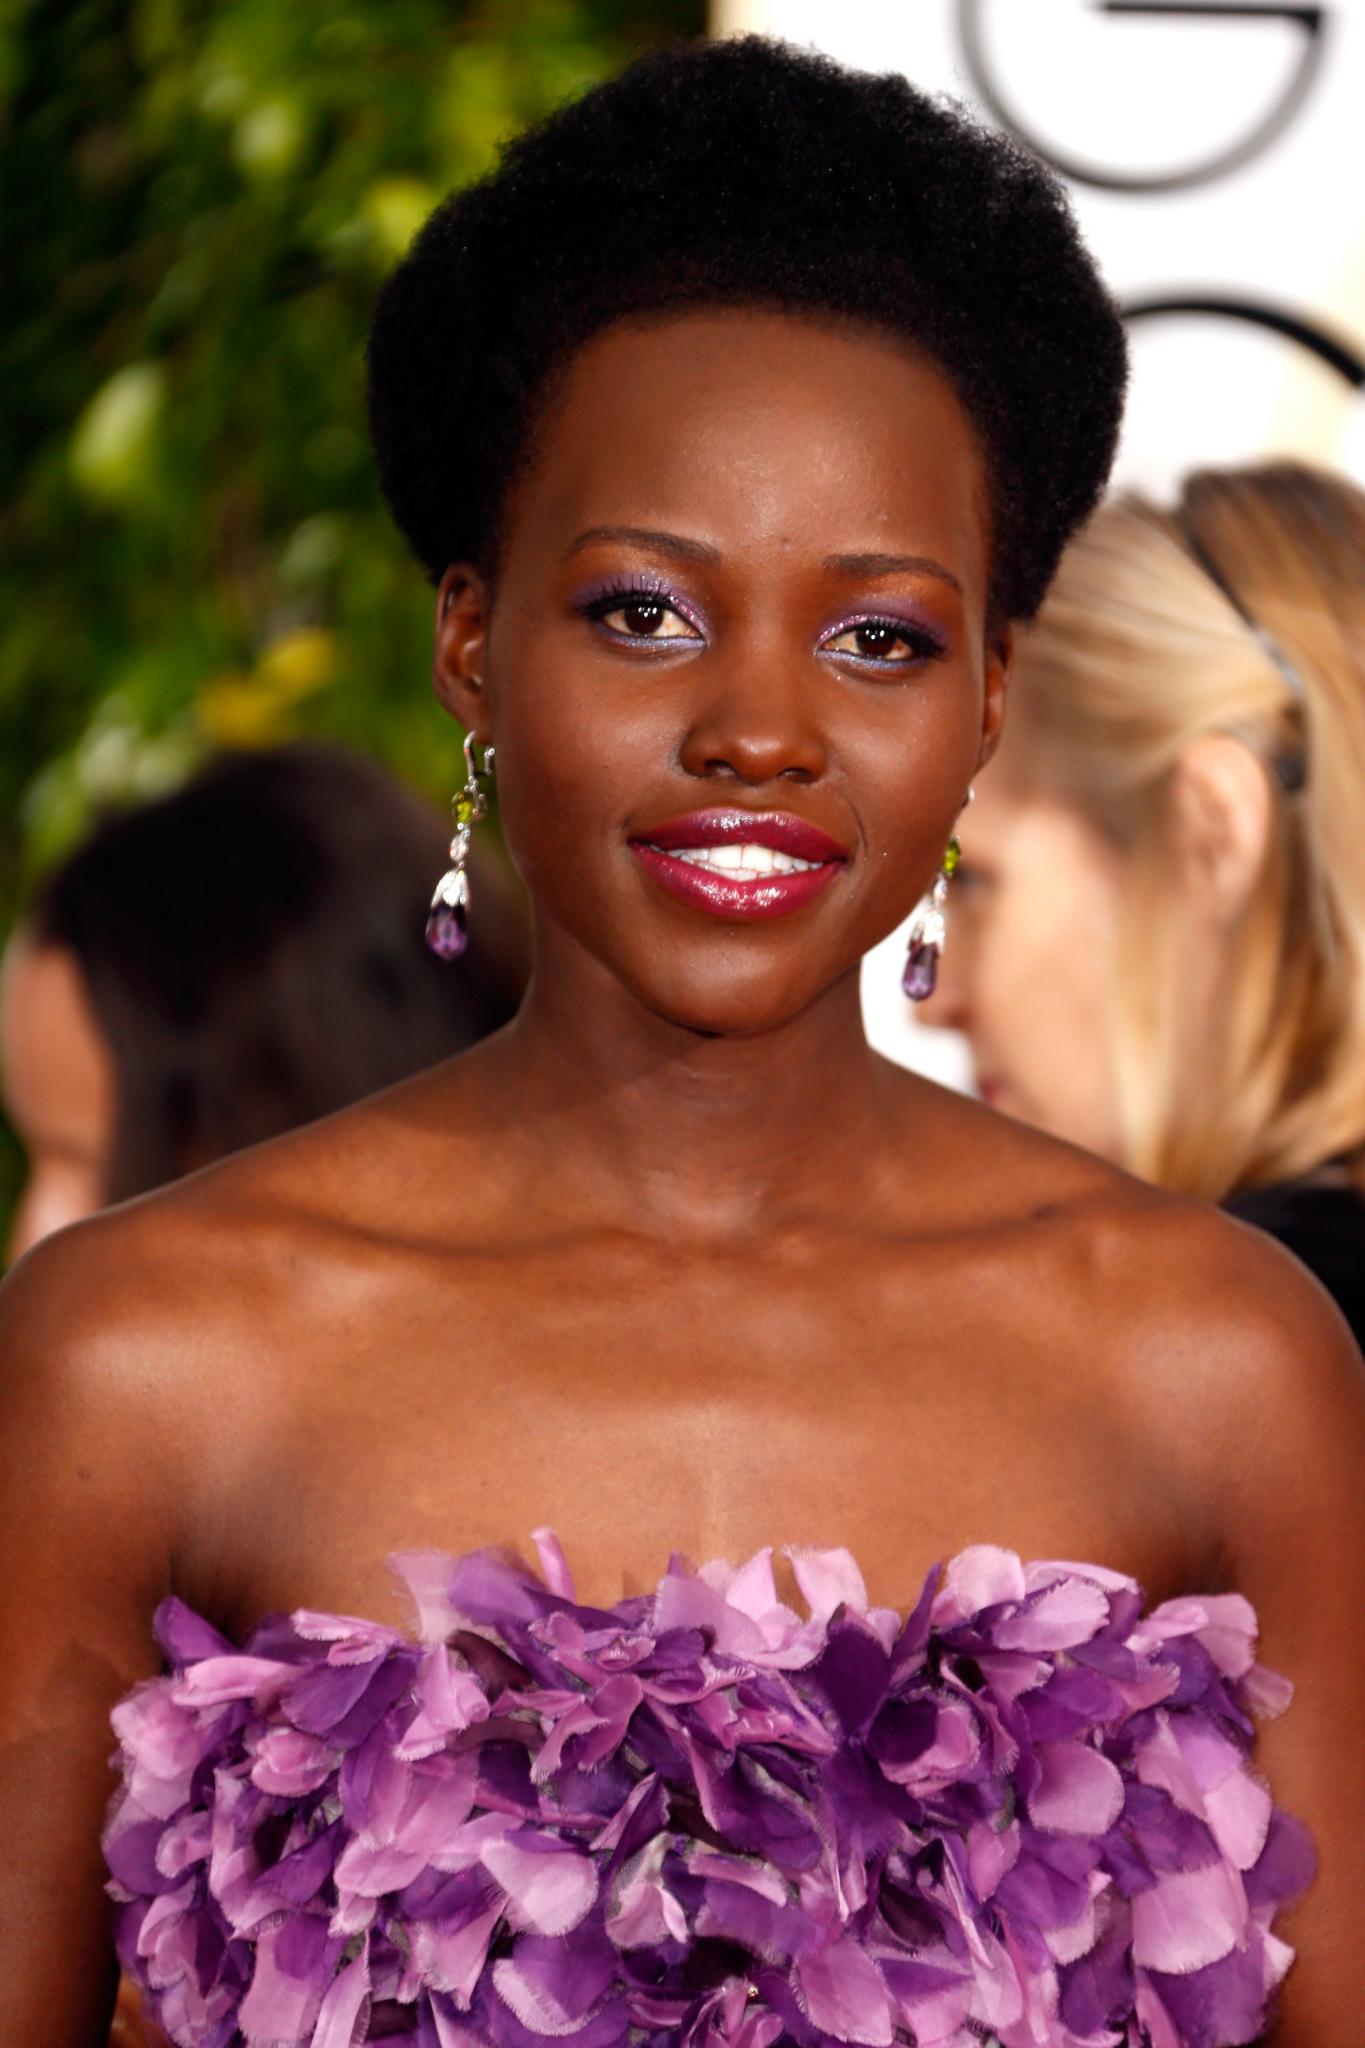 Lupita Nyong'o On Why It's Important She's Working with a Female Director on ‘Eclisped’
